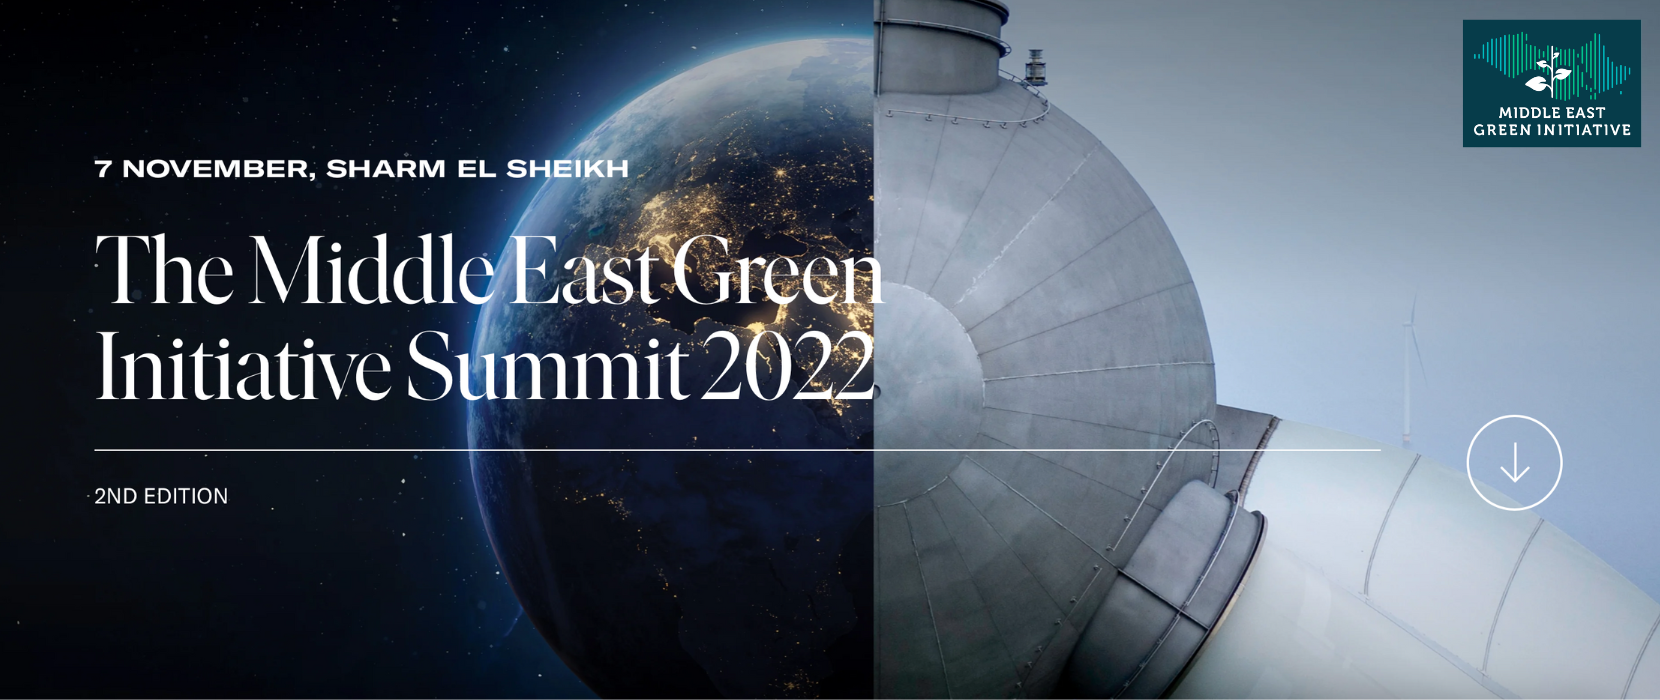 The Middle East Green Initiative Summit 2022 Kaust Sustainability